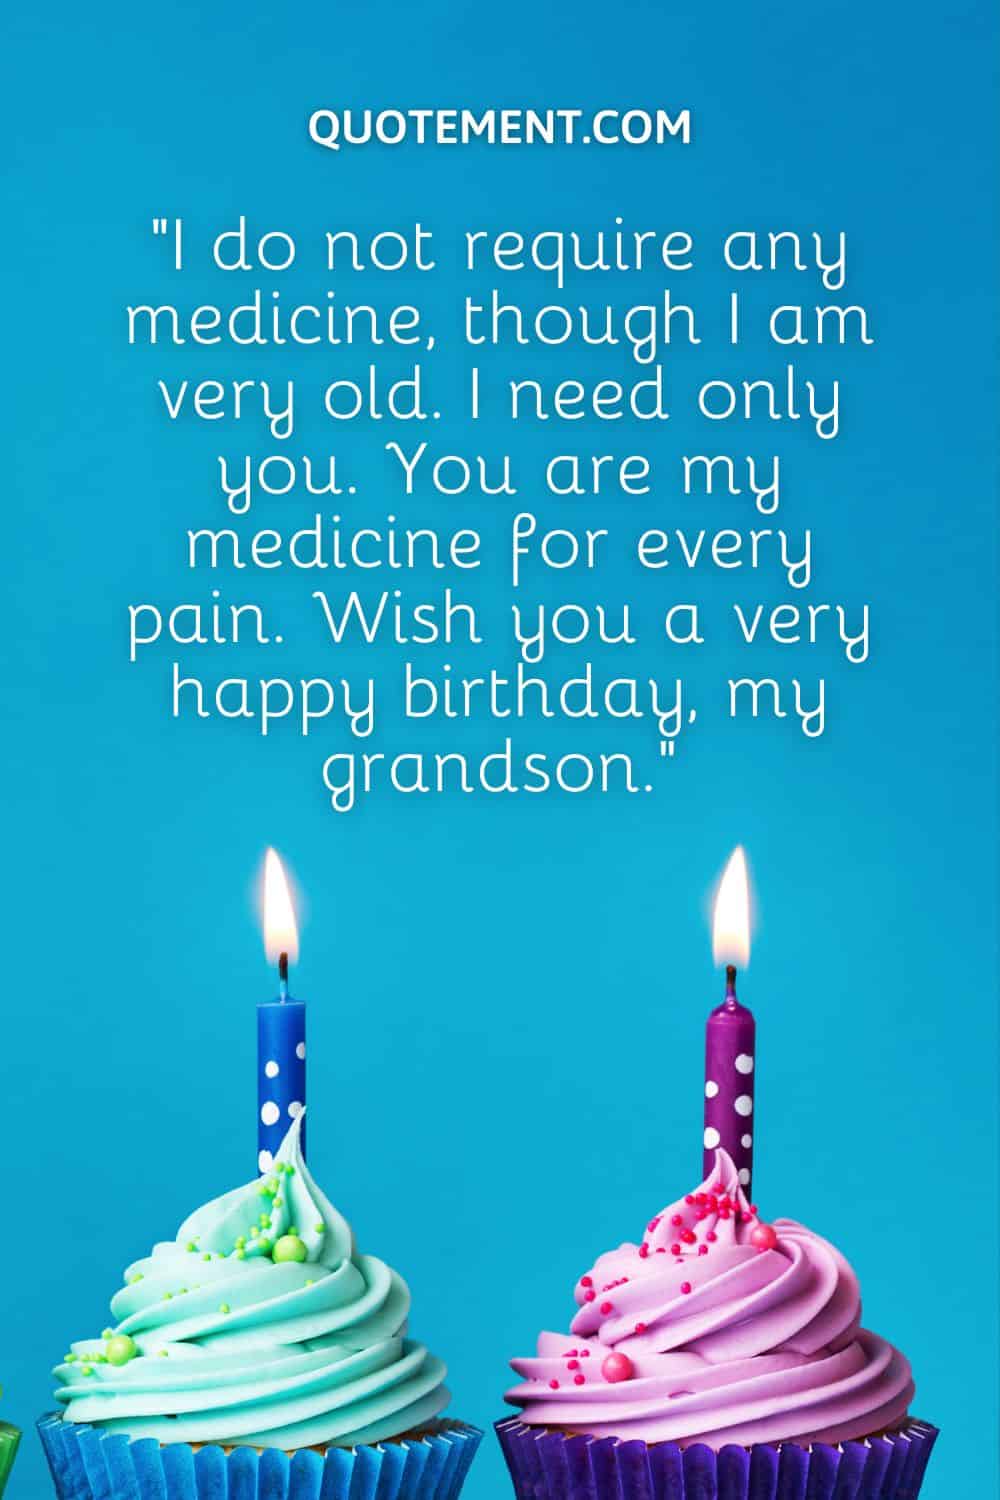 “I do not require any medicine, though I am very old. I need only you. You are my medicine for every pain. Wish you a very happy birthday, my grandson.”